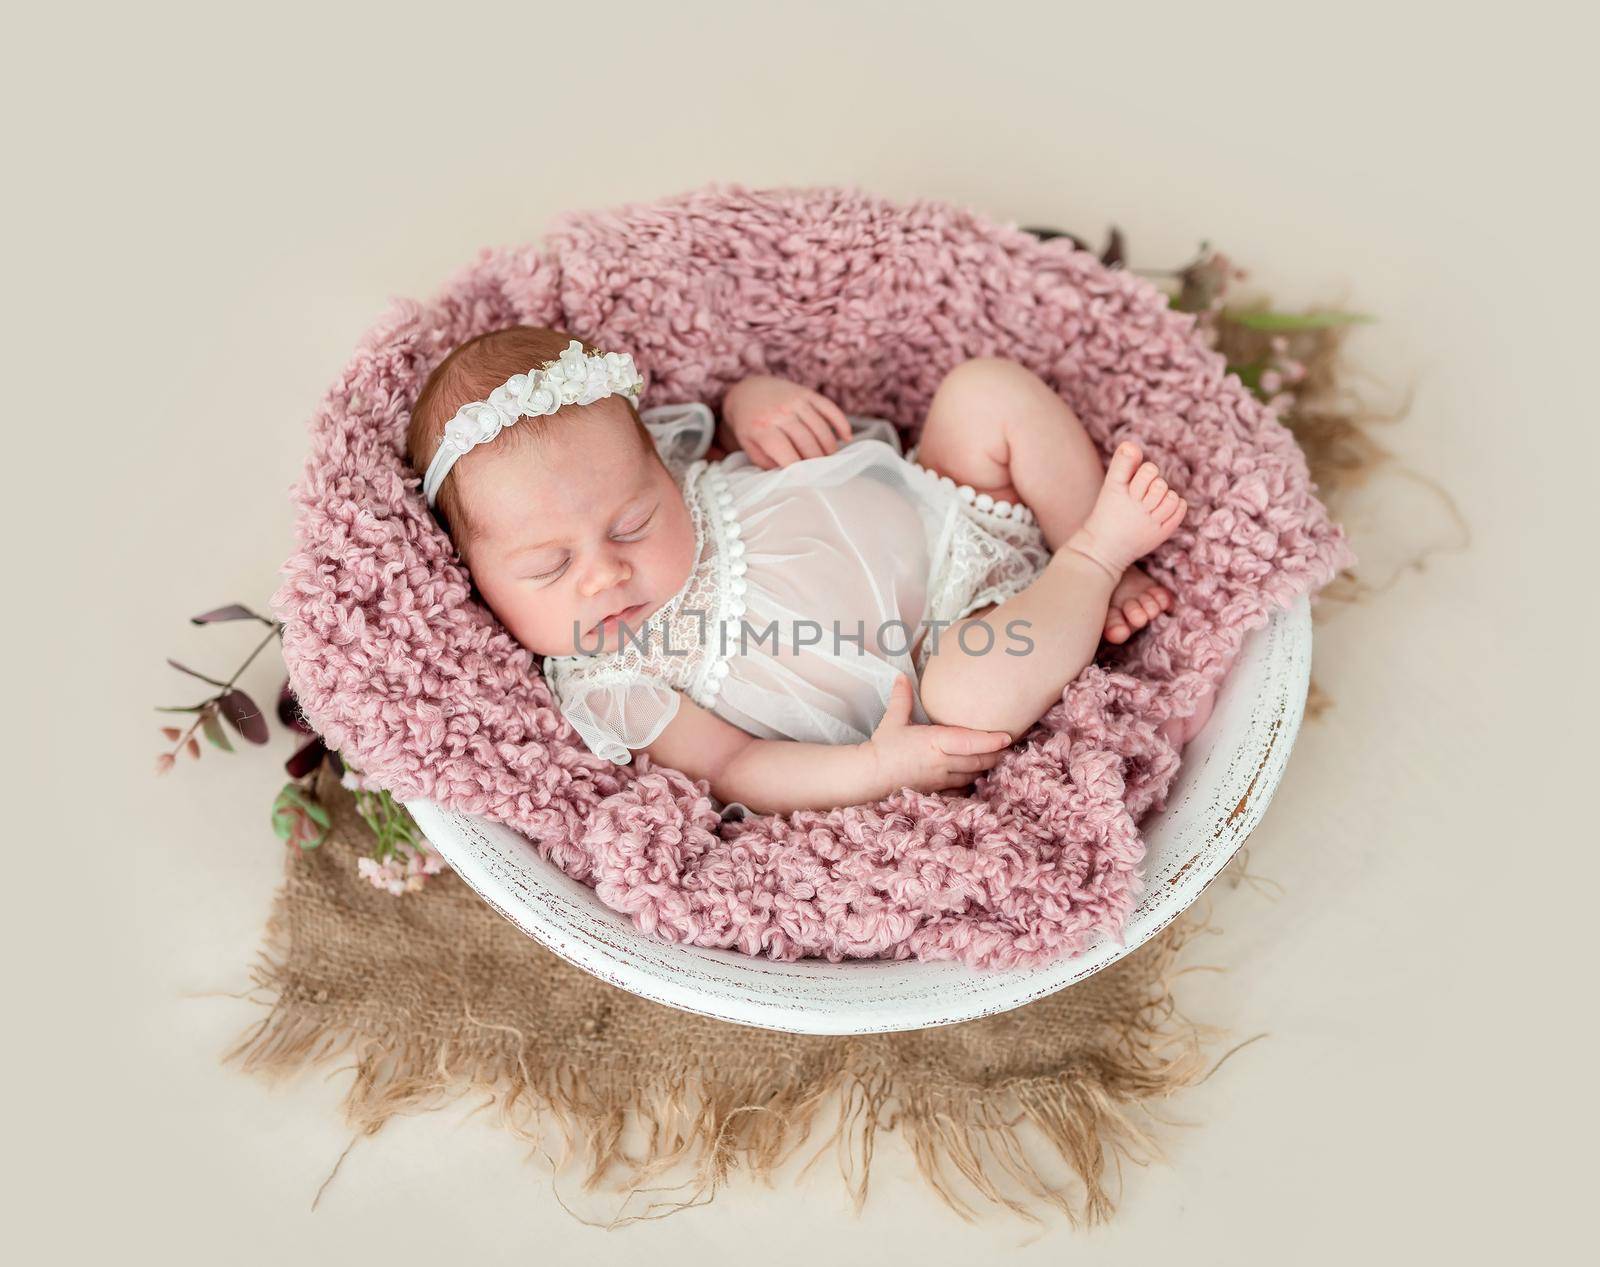 Lovely newborn sleeping with knitted toy